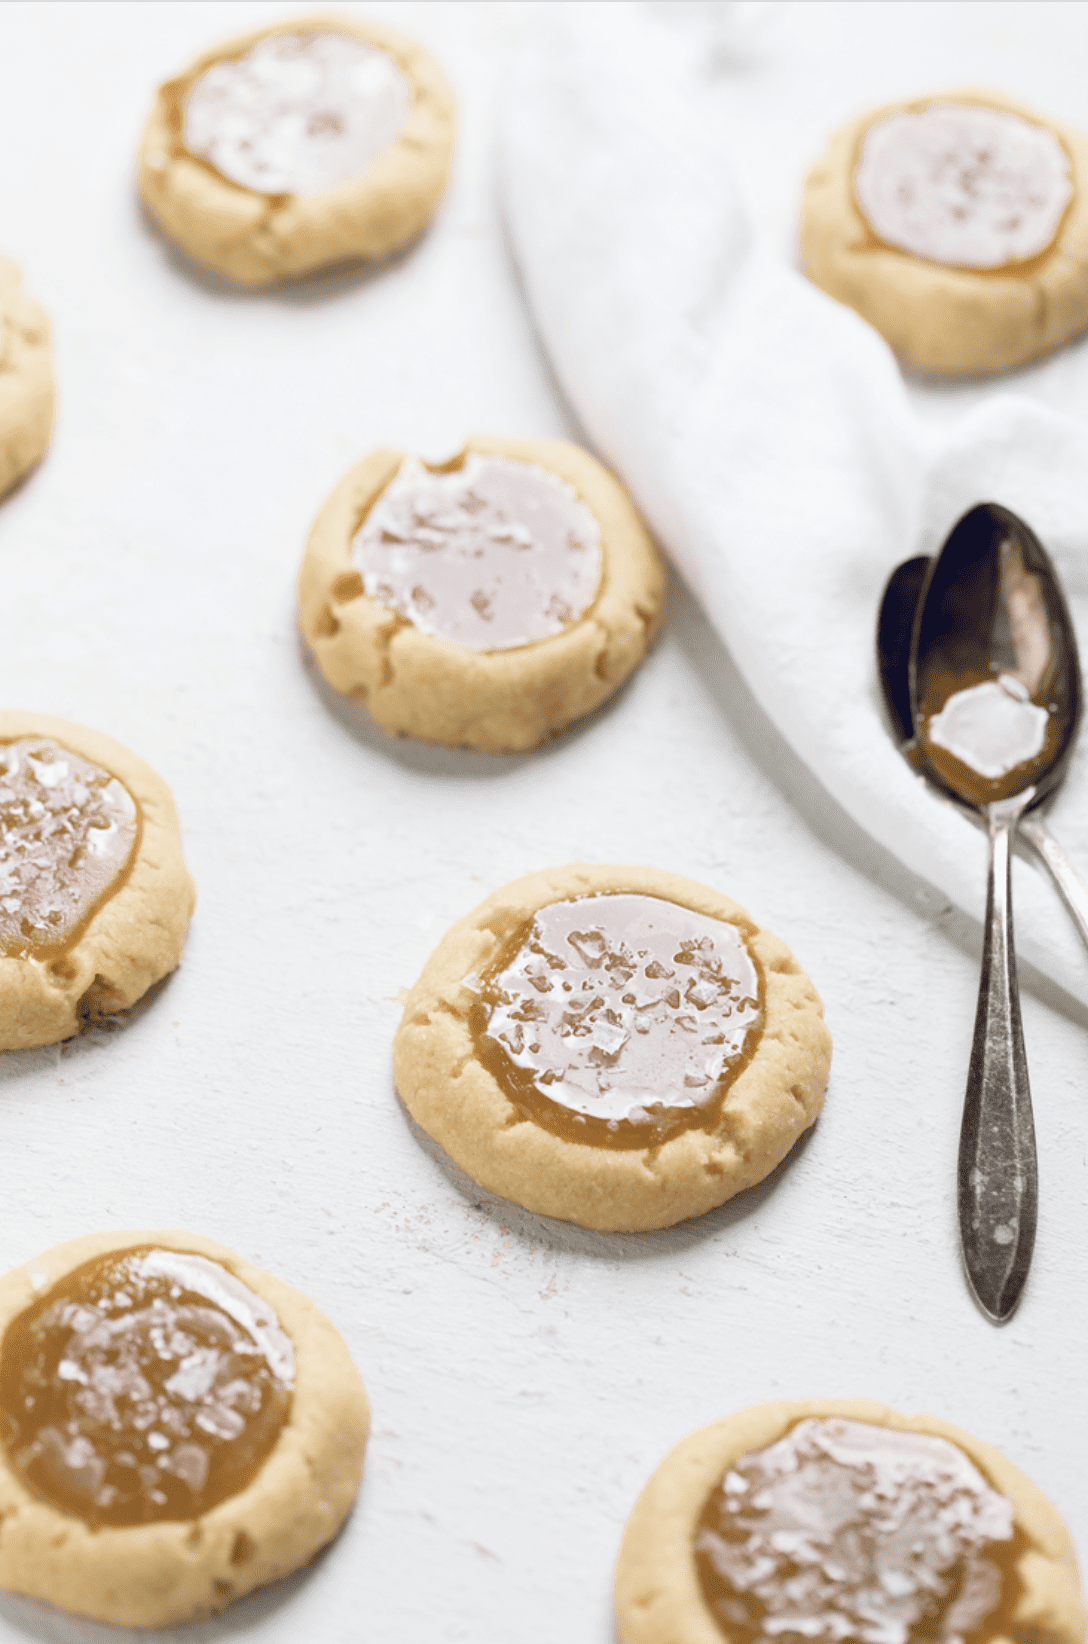 An overhead view of vegan salted caramel cookies with fillings in the center.